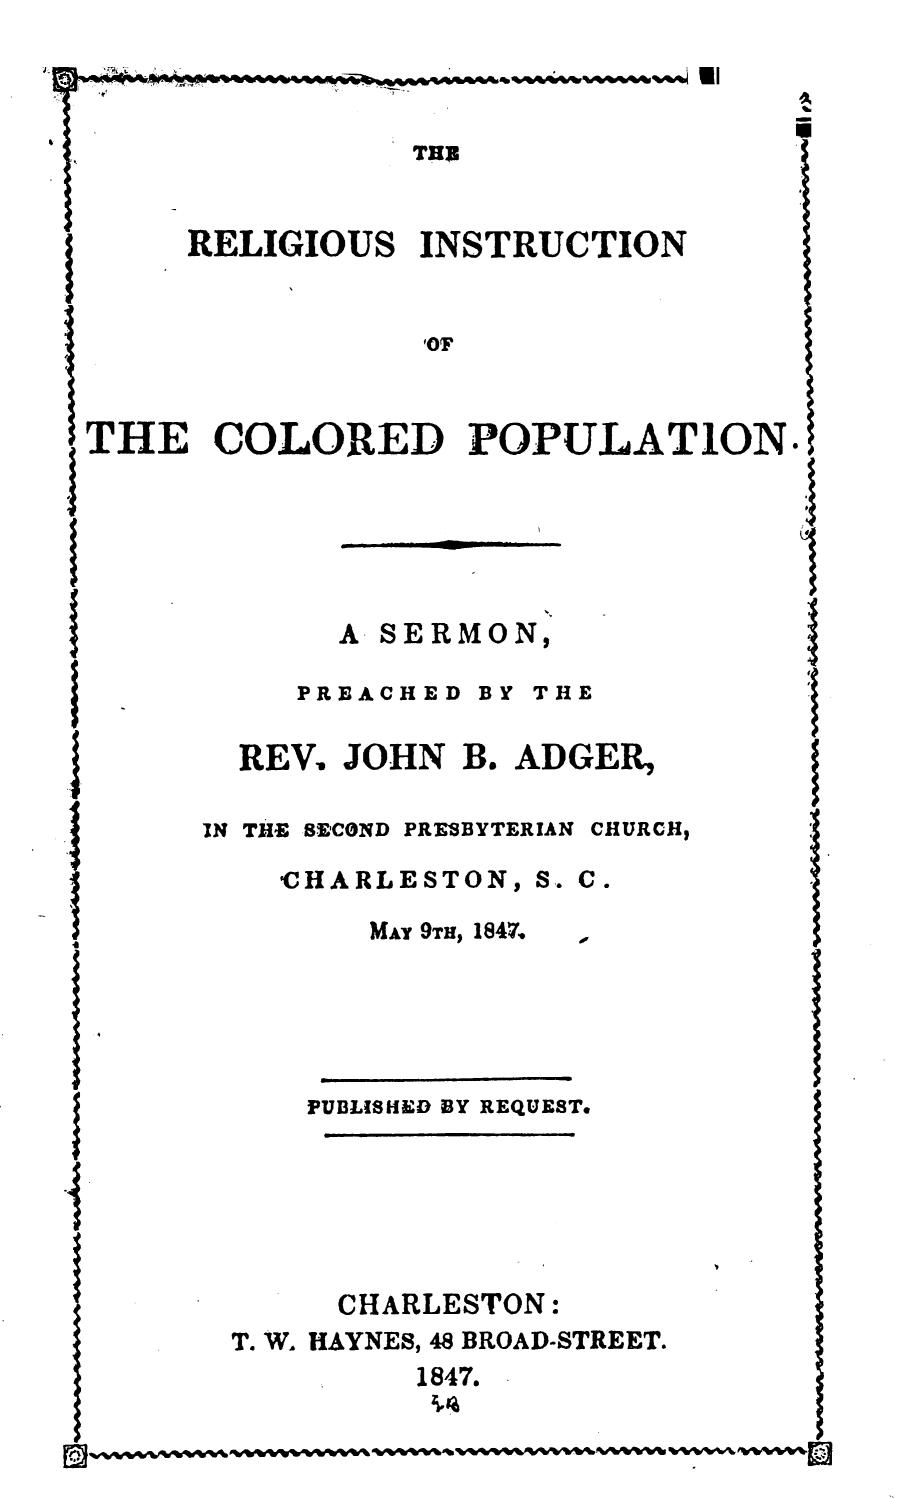 handle is hein.religion/rlgitcpp0001 and id is 1 raw text is: 



                  THU3


I     RELIGIOUS INSTRUCTION





THE COLORED POPULATION.





              A SERMON,

   -        PREACHED BY THE

         REV. JOHN B. ADGER,

       IN THE SECOND PRESBYTERIAN CHURCH,

           CHARLESTON, S. C.
               MAT 9TH, 1847.  1





            PUBLISHED BY REQUEST.

.4



              CHARLESTON:
        T. W. HAYNES, 48 BROAD-STREET.
               w  1847.


1,


I
I


%r%0%1%0%0% vvvwvtml


